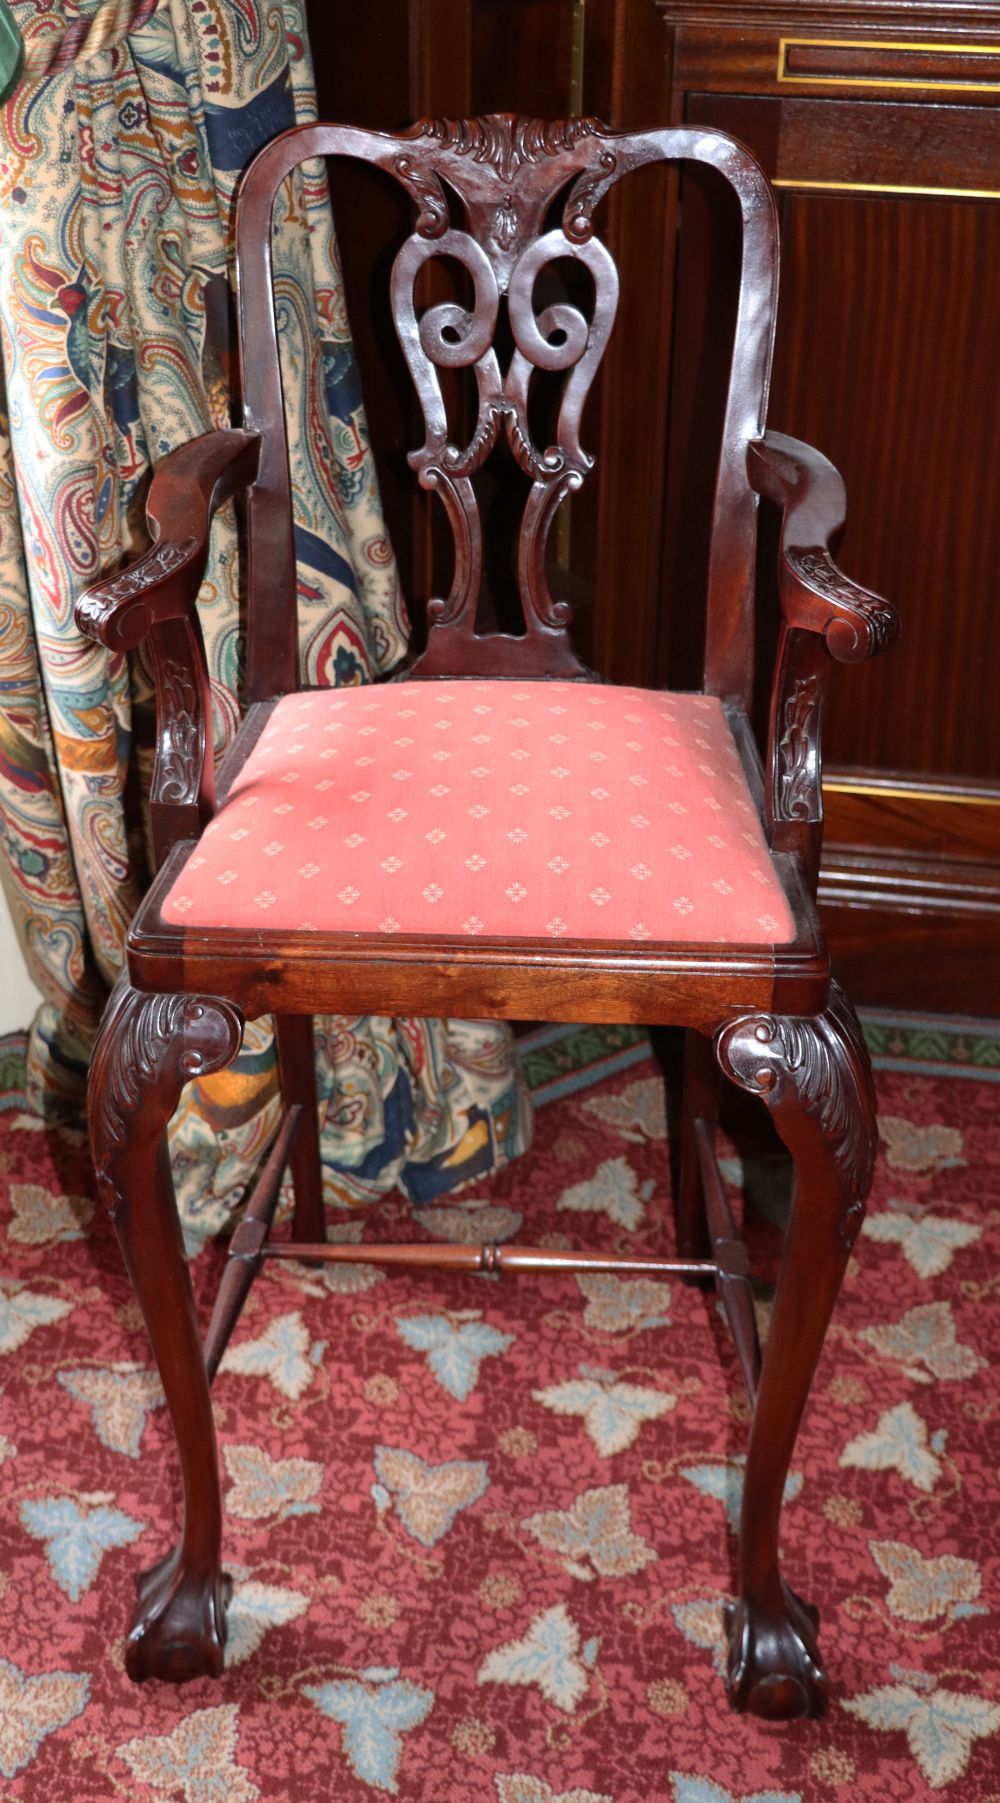 249 by A MAHOGANY GEORGIAN HIGH CHAIR  at deVeres Auctions